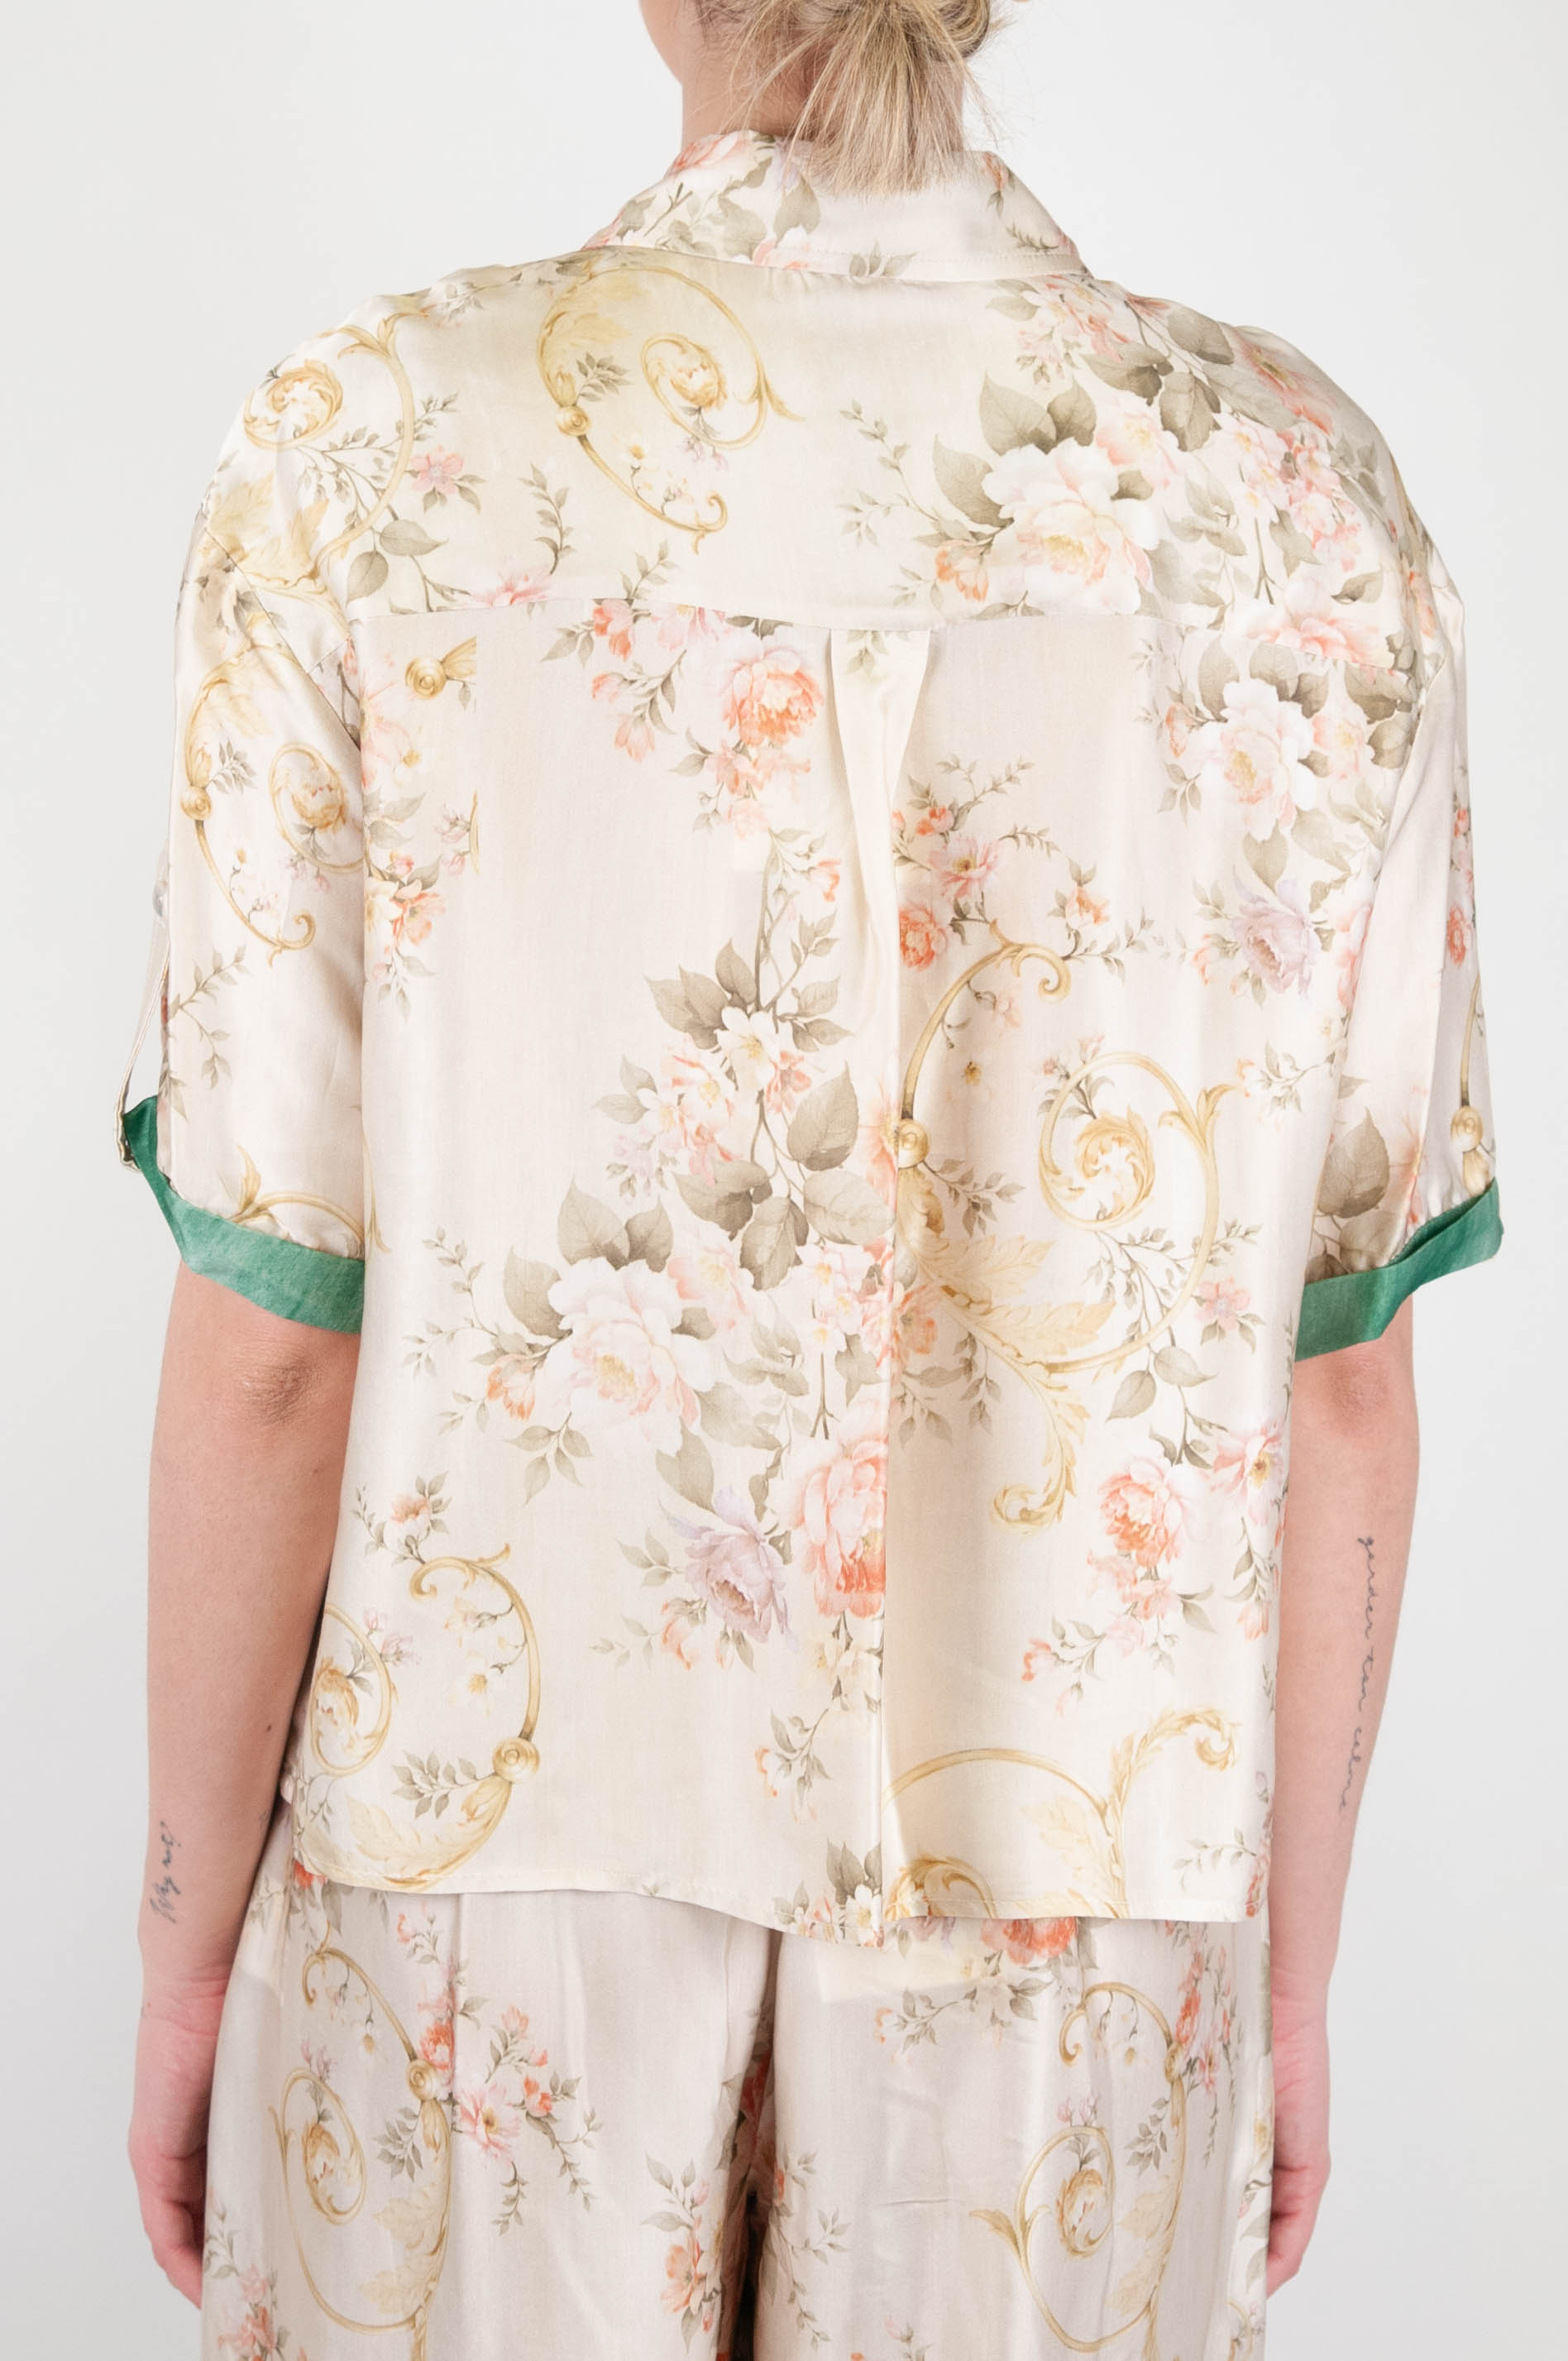 Tension in - Floral patterned half-sleeved shirt in viscose